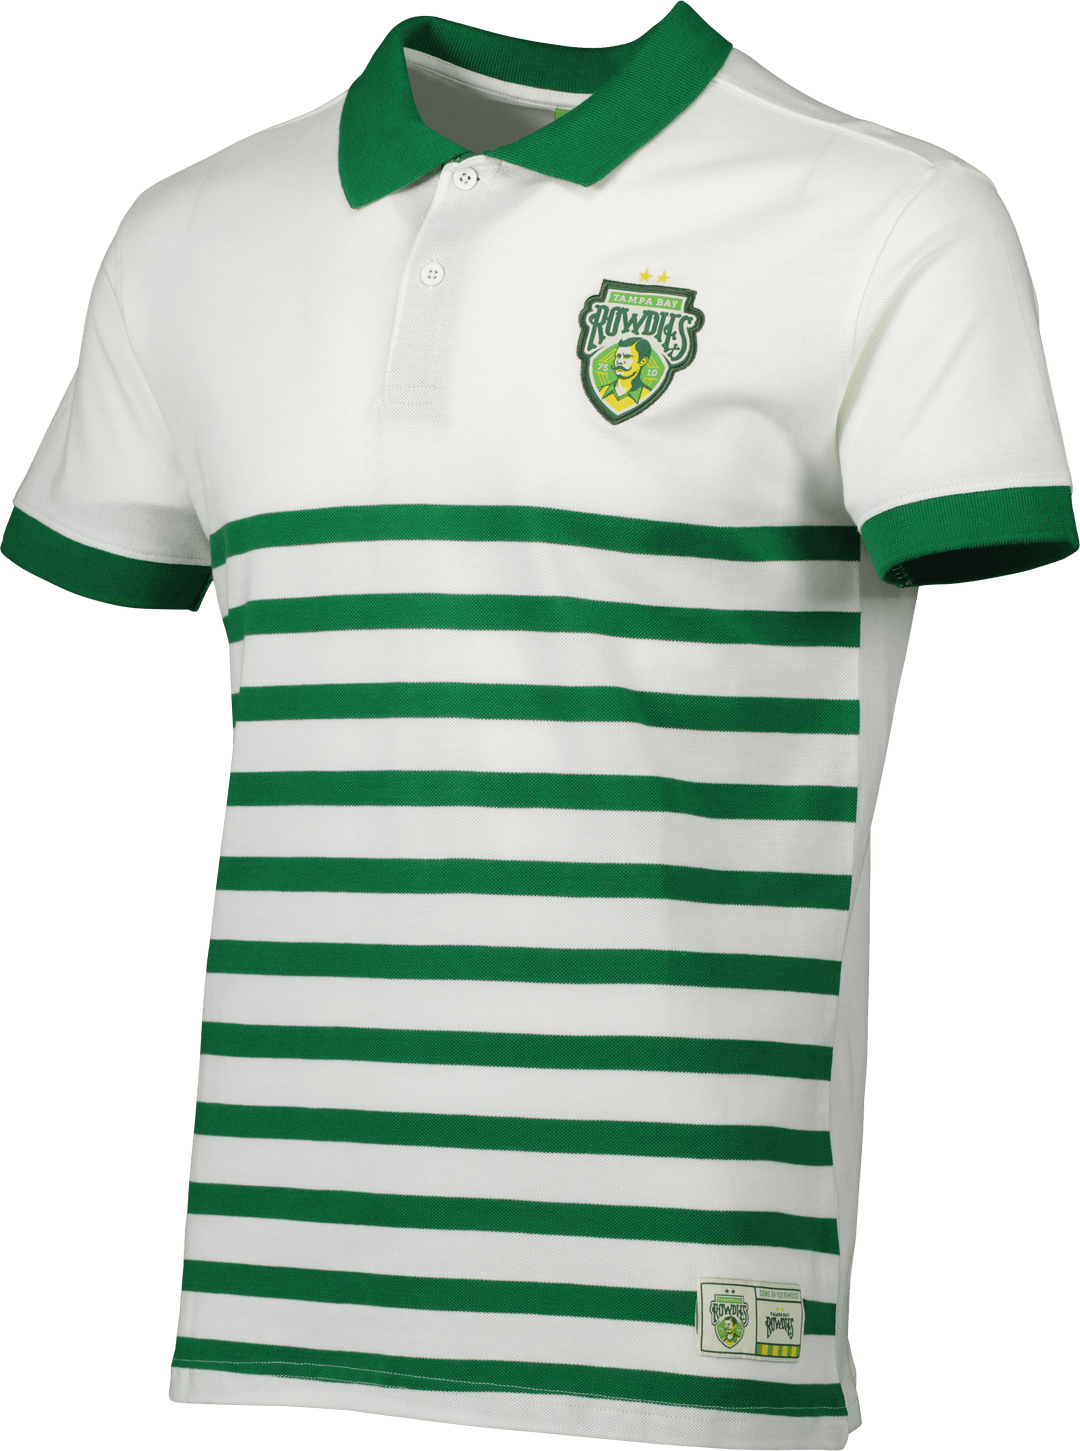 ROWDIES MEN'S WHITE STRIPED CREST POLO - The Bay Republic | Team Store of the Tampa Bay Rays & Rowdies